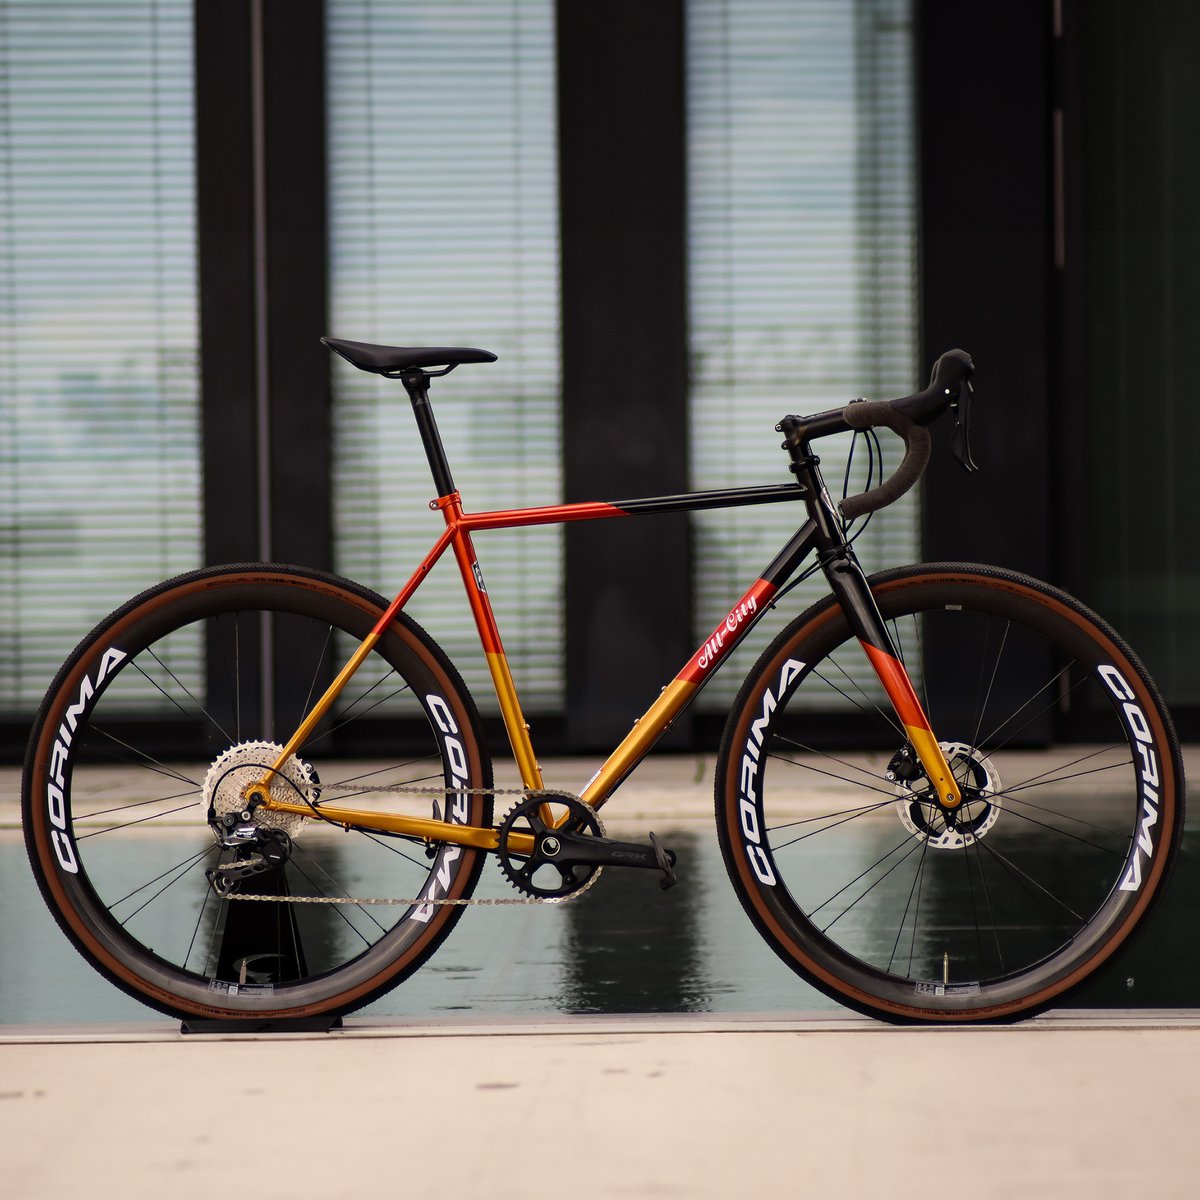 ESSENTIA 40 wheels looking 🔥 on this Cosmic Stallion from All City Cycles Thank you to our friends over at Gravelhood Bikeshop in Germany for sharing these shots with us 🙏 bit.ly/essentia40 📸 GRAVELHOOD Bikeshop #corima #carbonwheels #madeinfrance #performancewheels